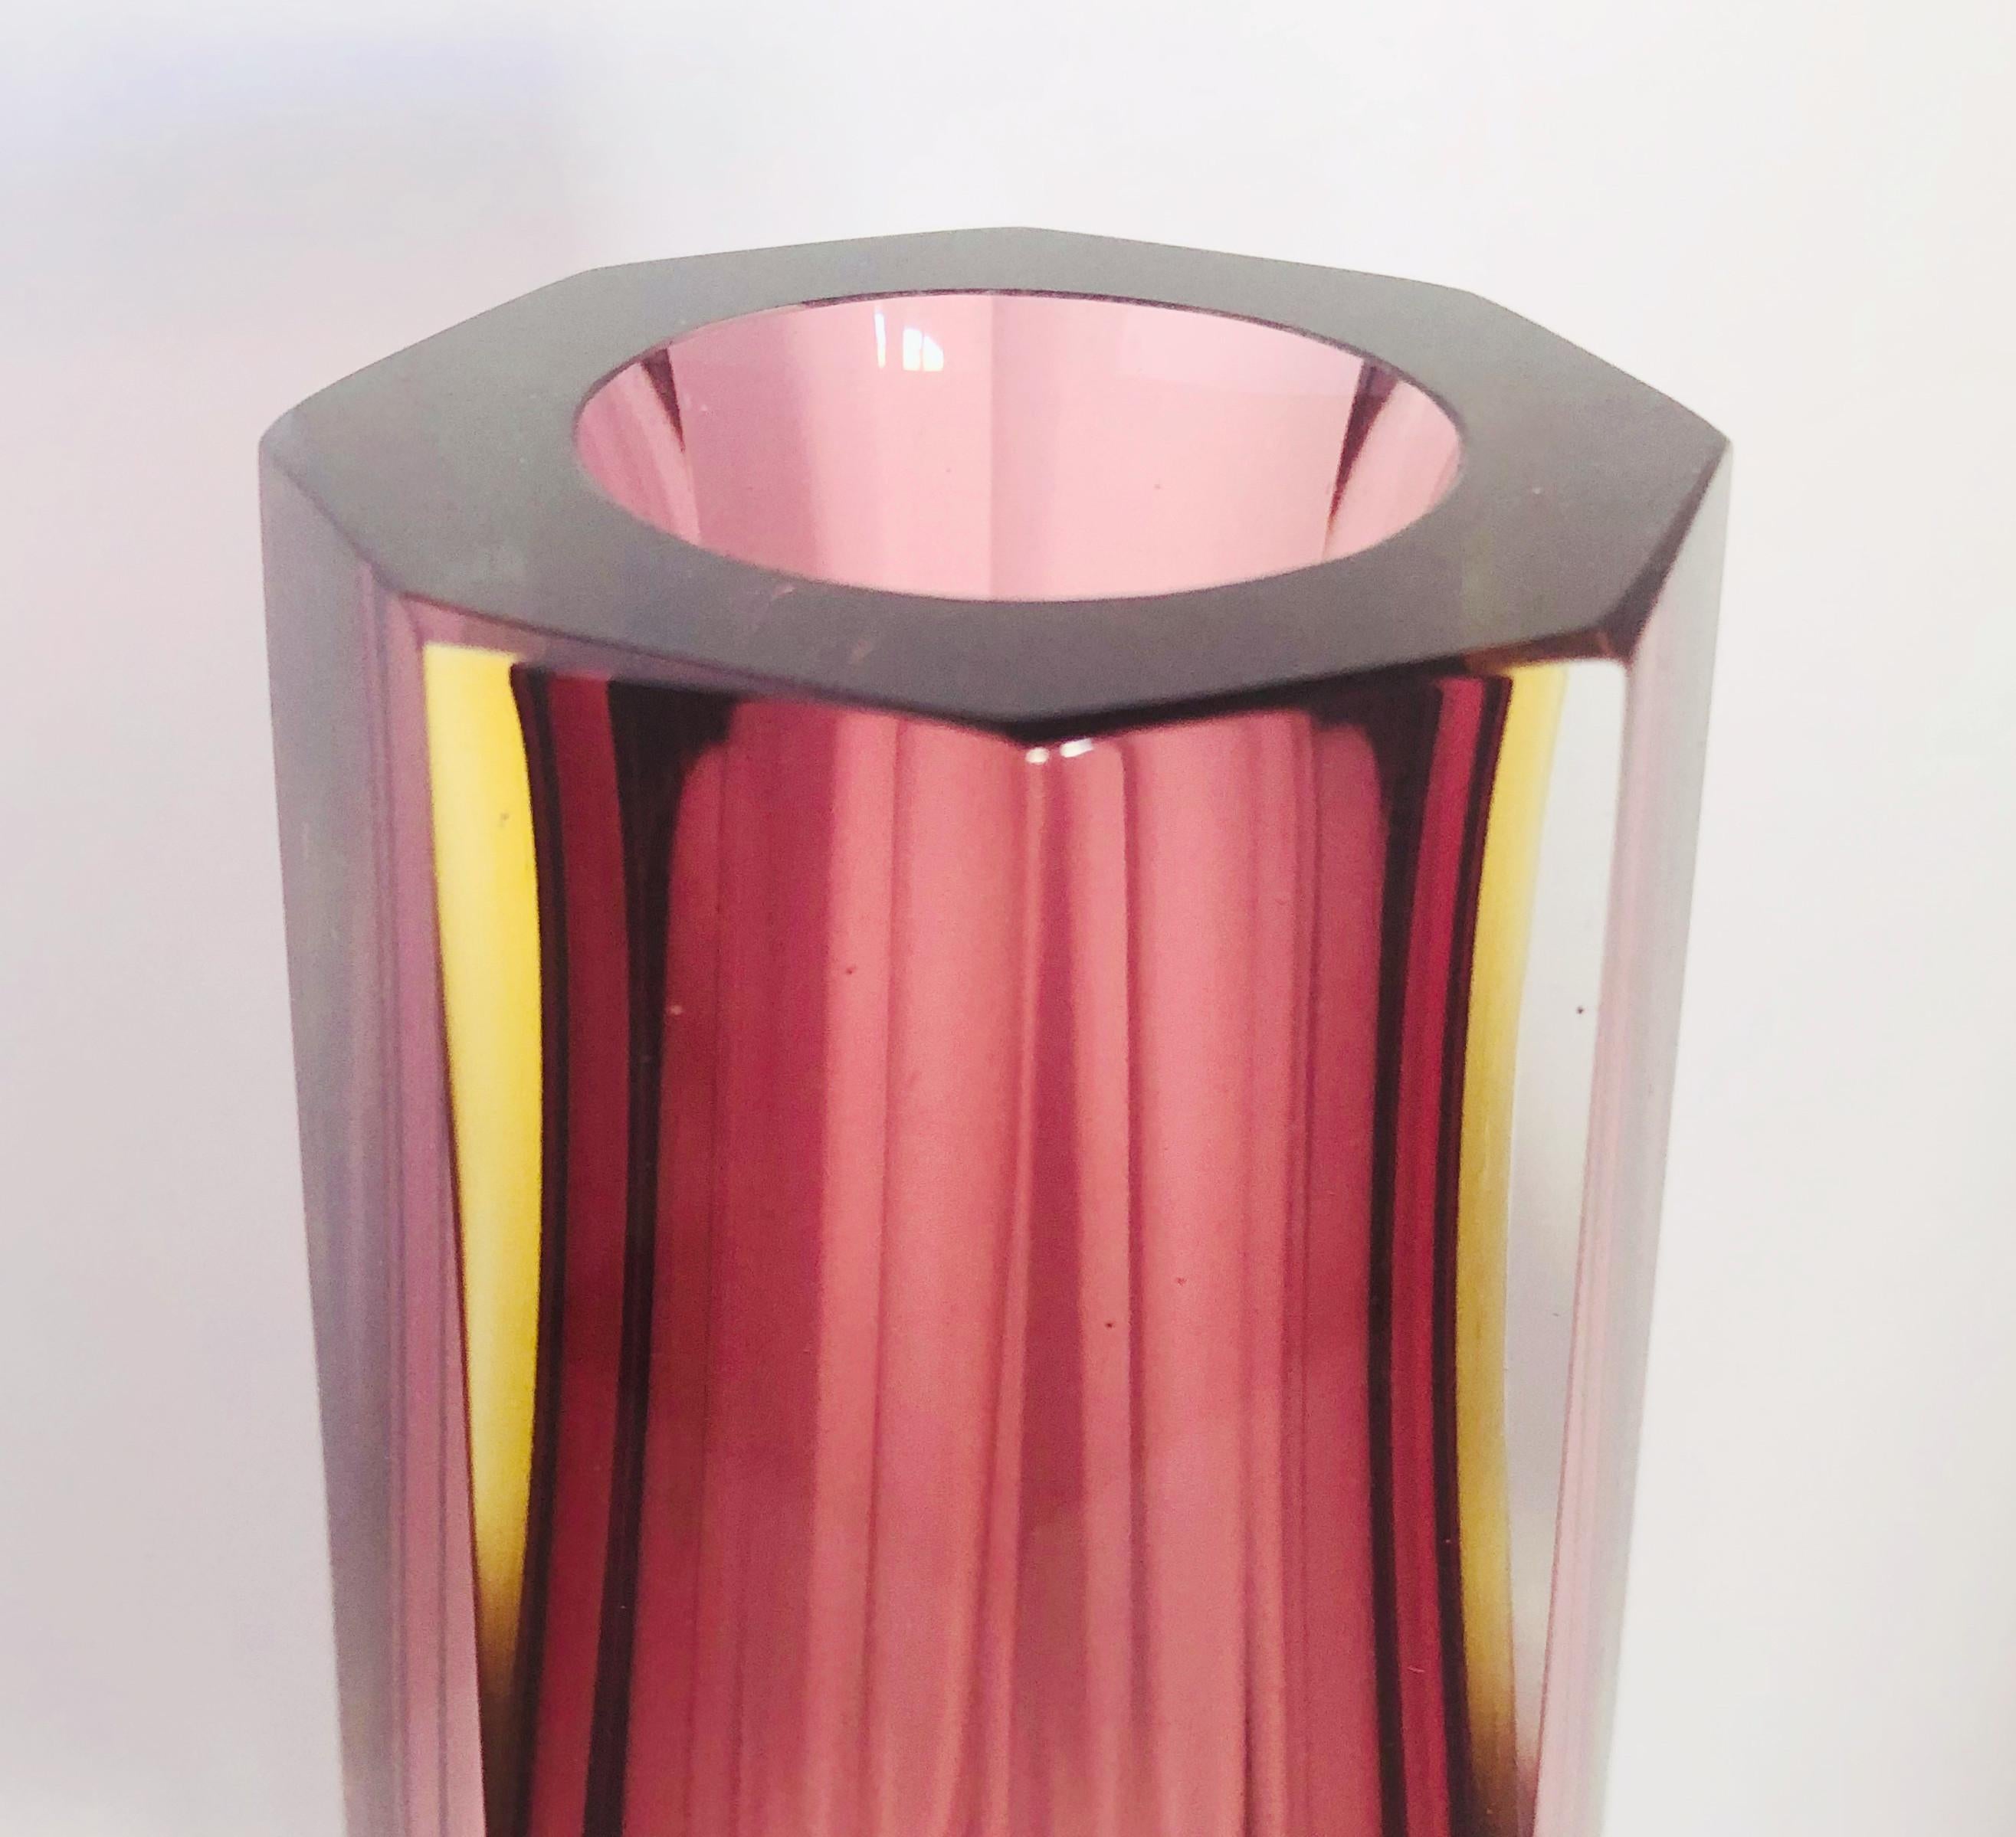 20th Century Pink Amethyst Sommerso Vase by Mandruzzato FINAL CLEARANCE SALE